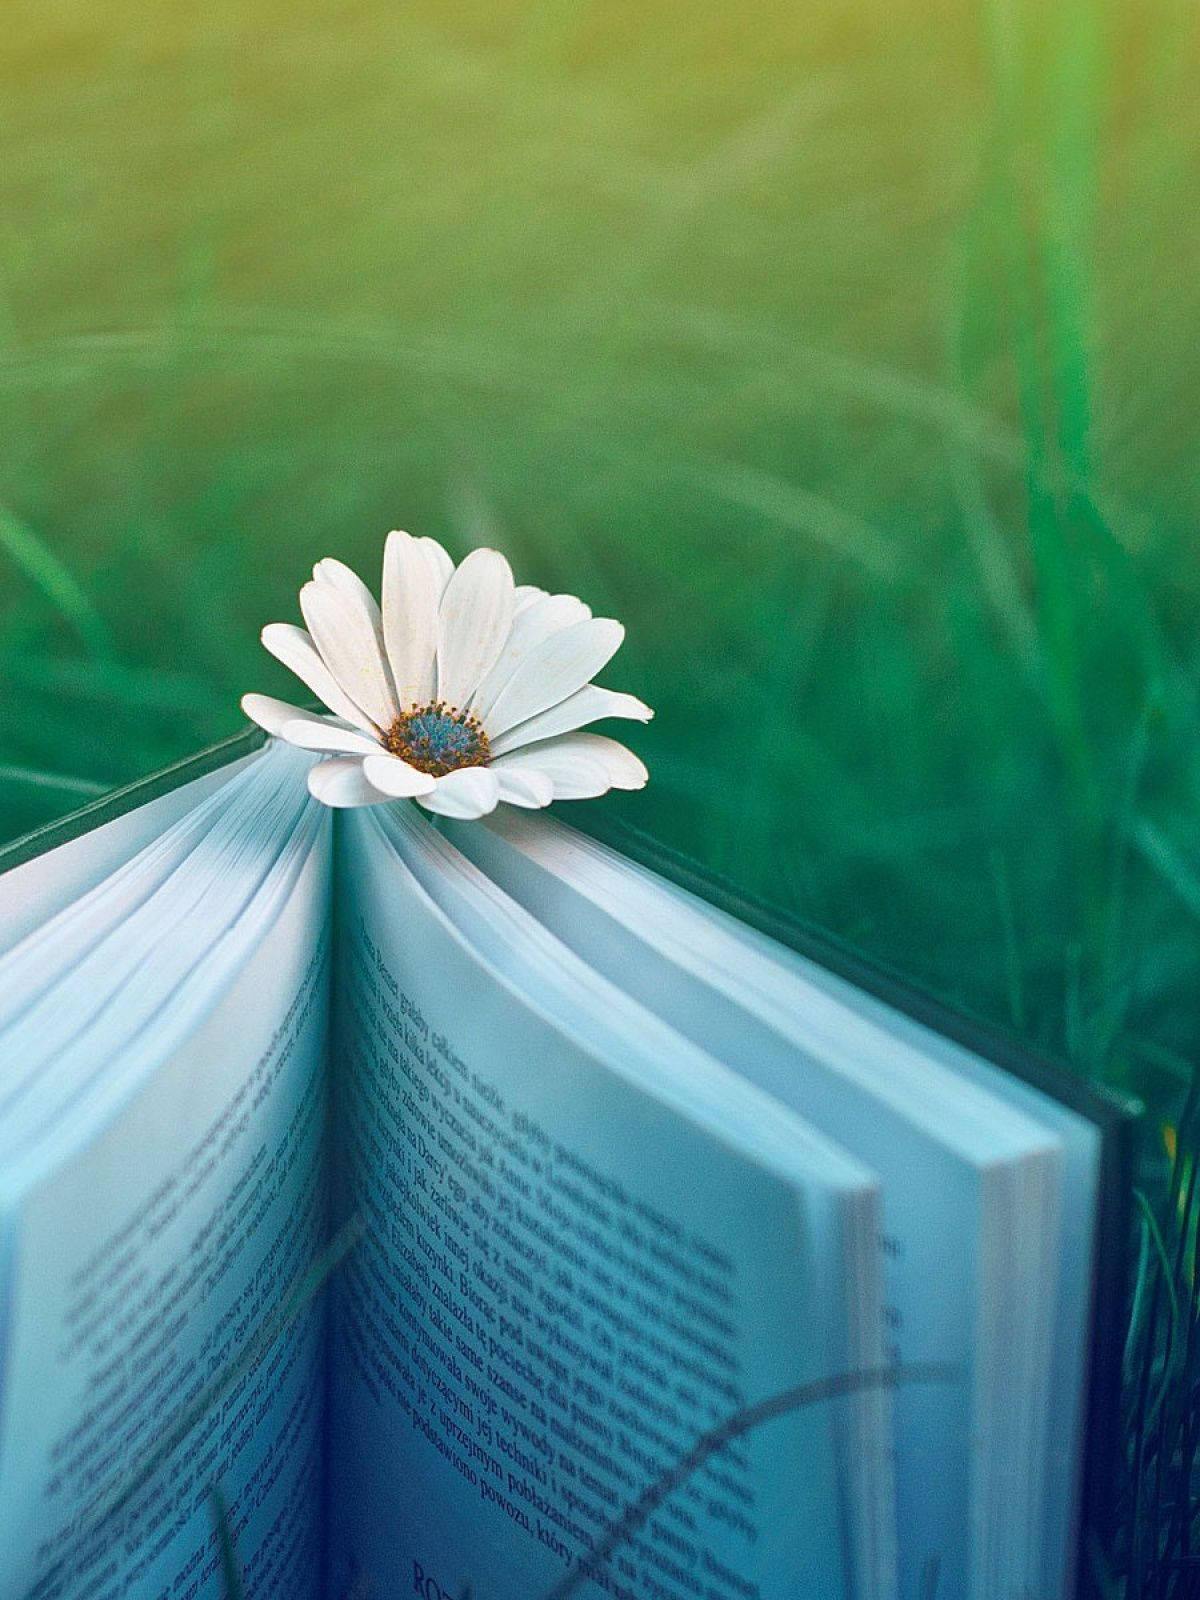 A white flower on top of a book - Android, books